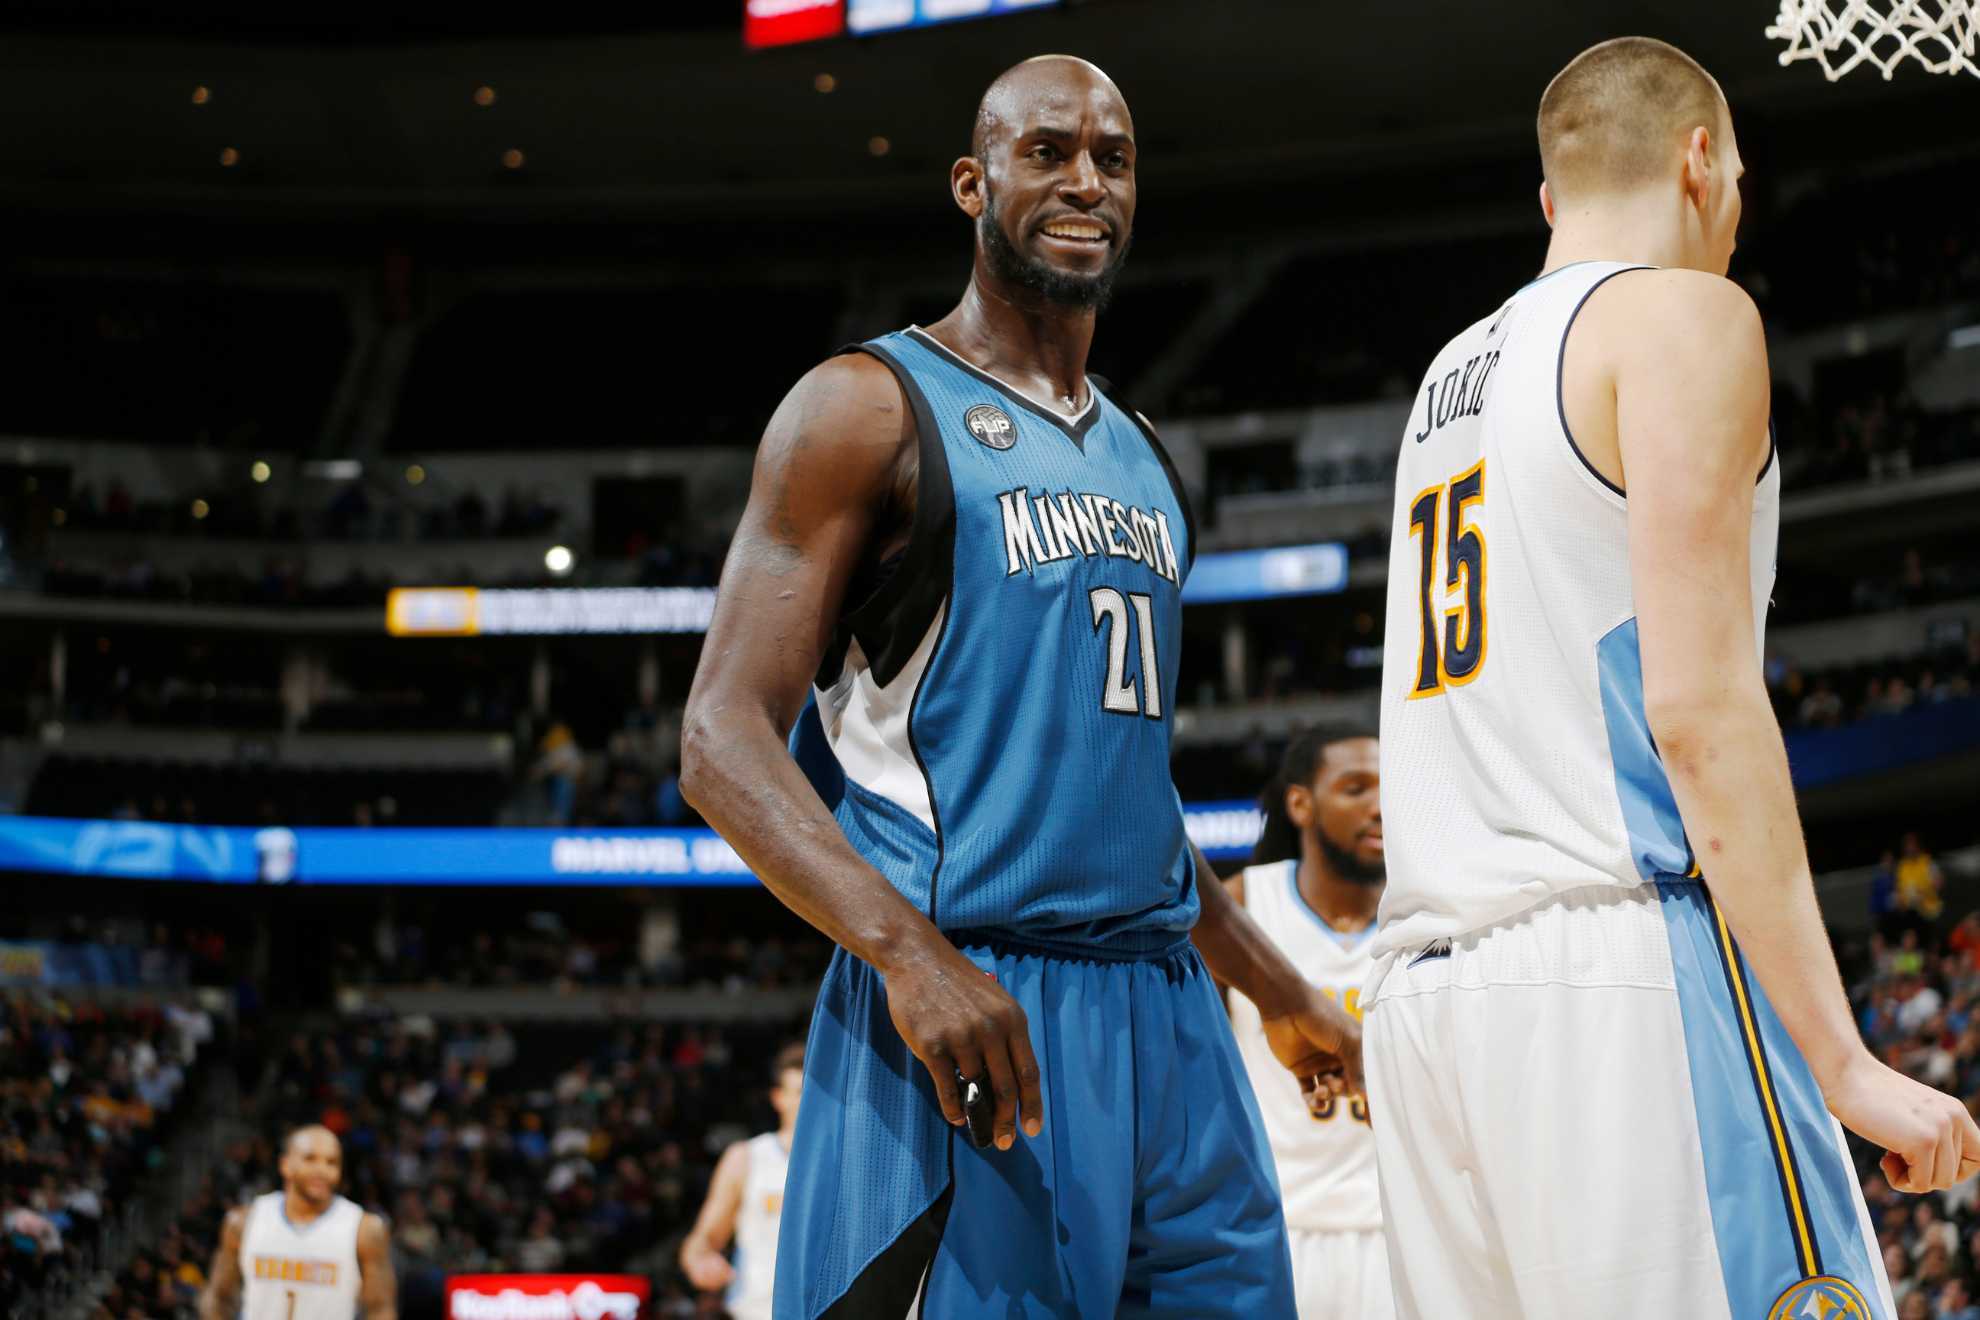 Kevin Garnett next to a young Nikola Jokic in 2015. The retired Timberwolves and Celtics great has the key to stopping the Nuggets star.